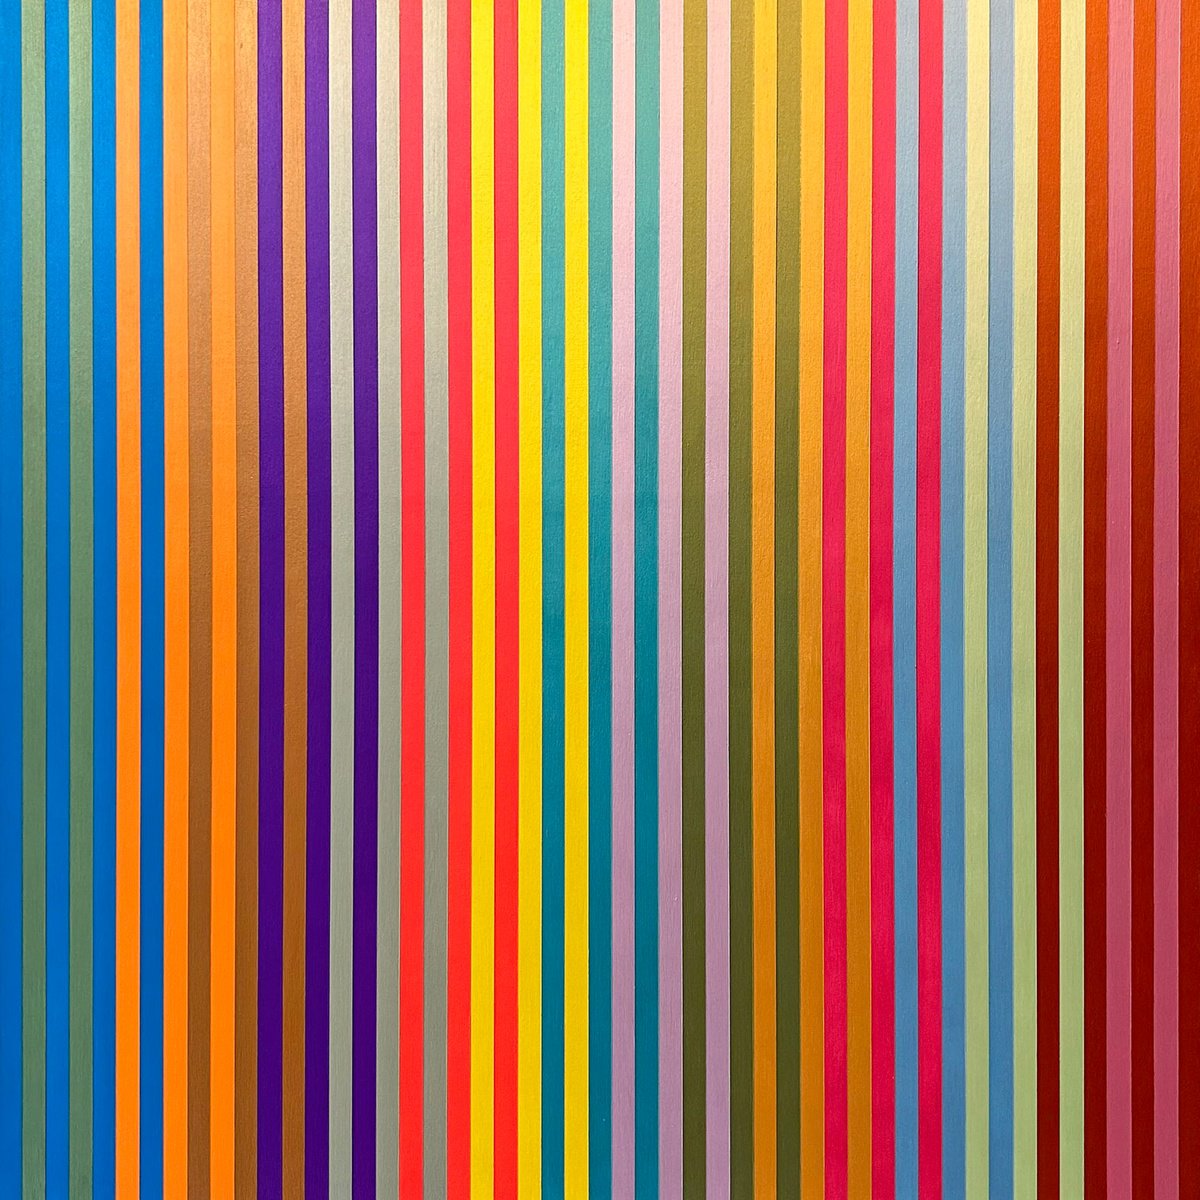 Stripes No.33 by Crispin Holder